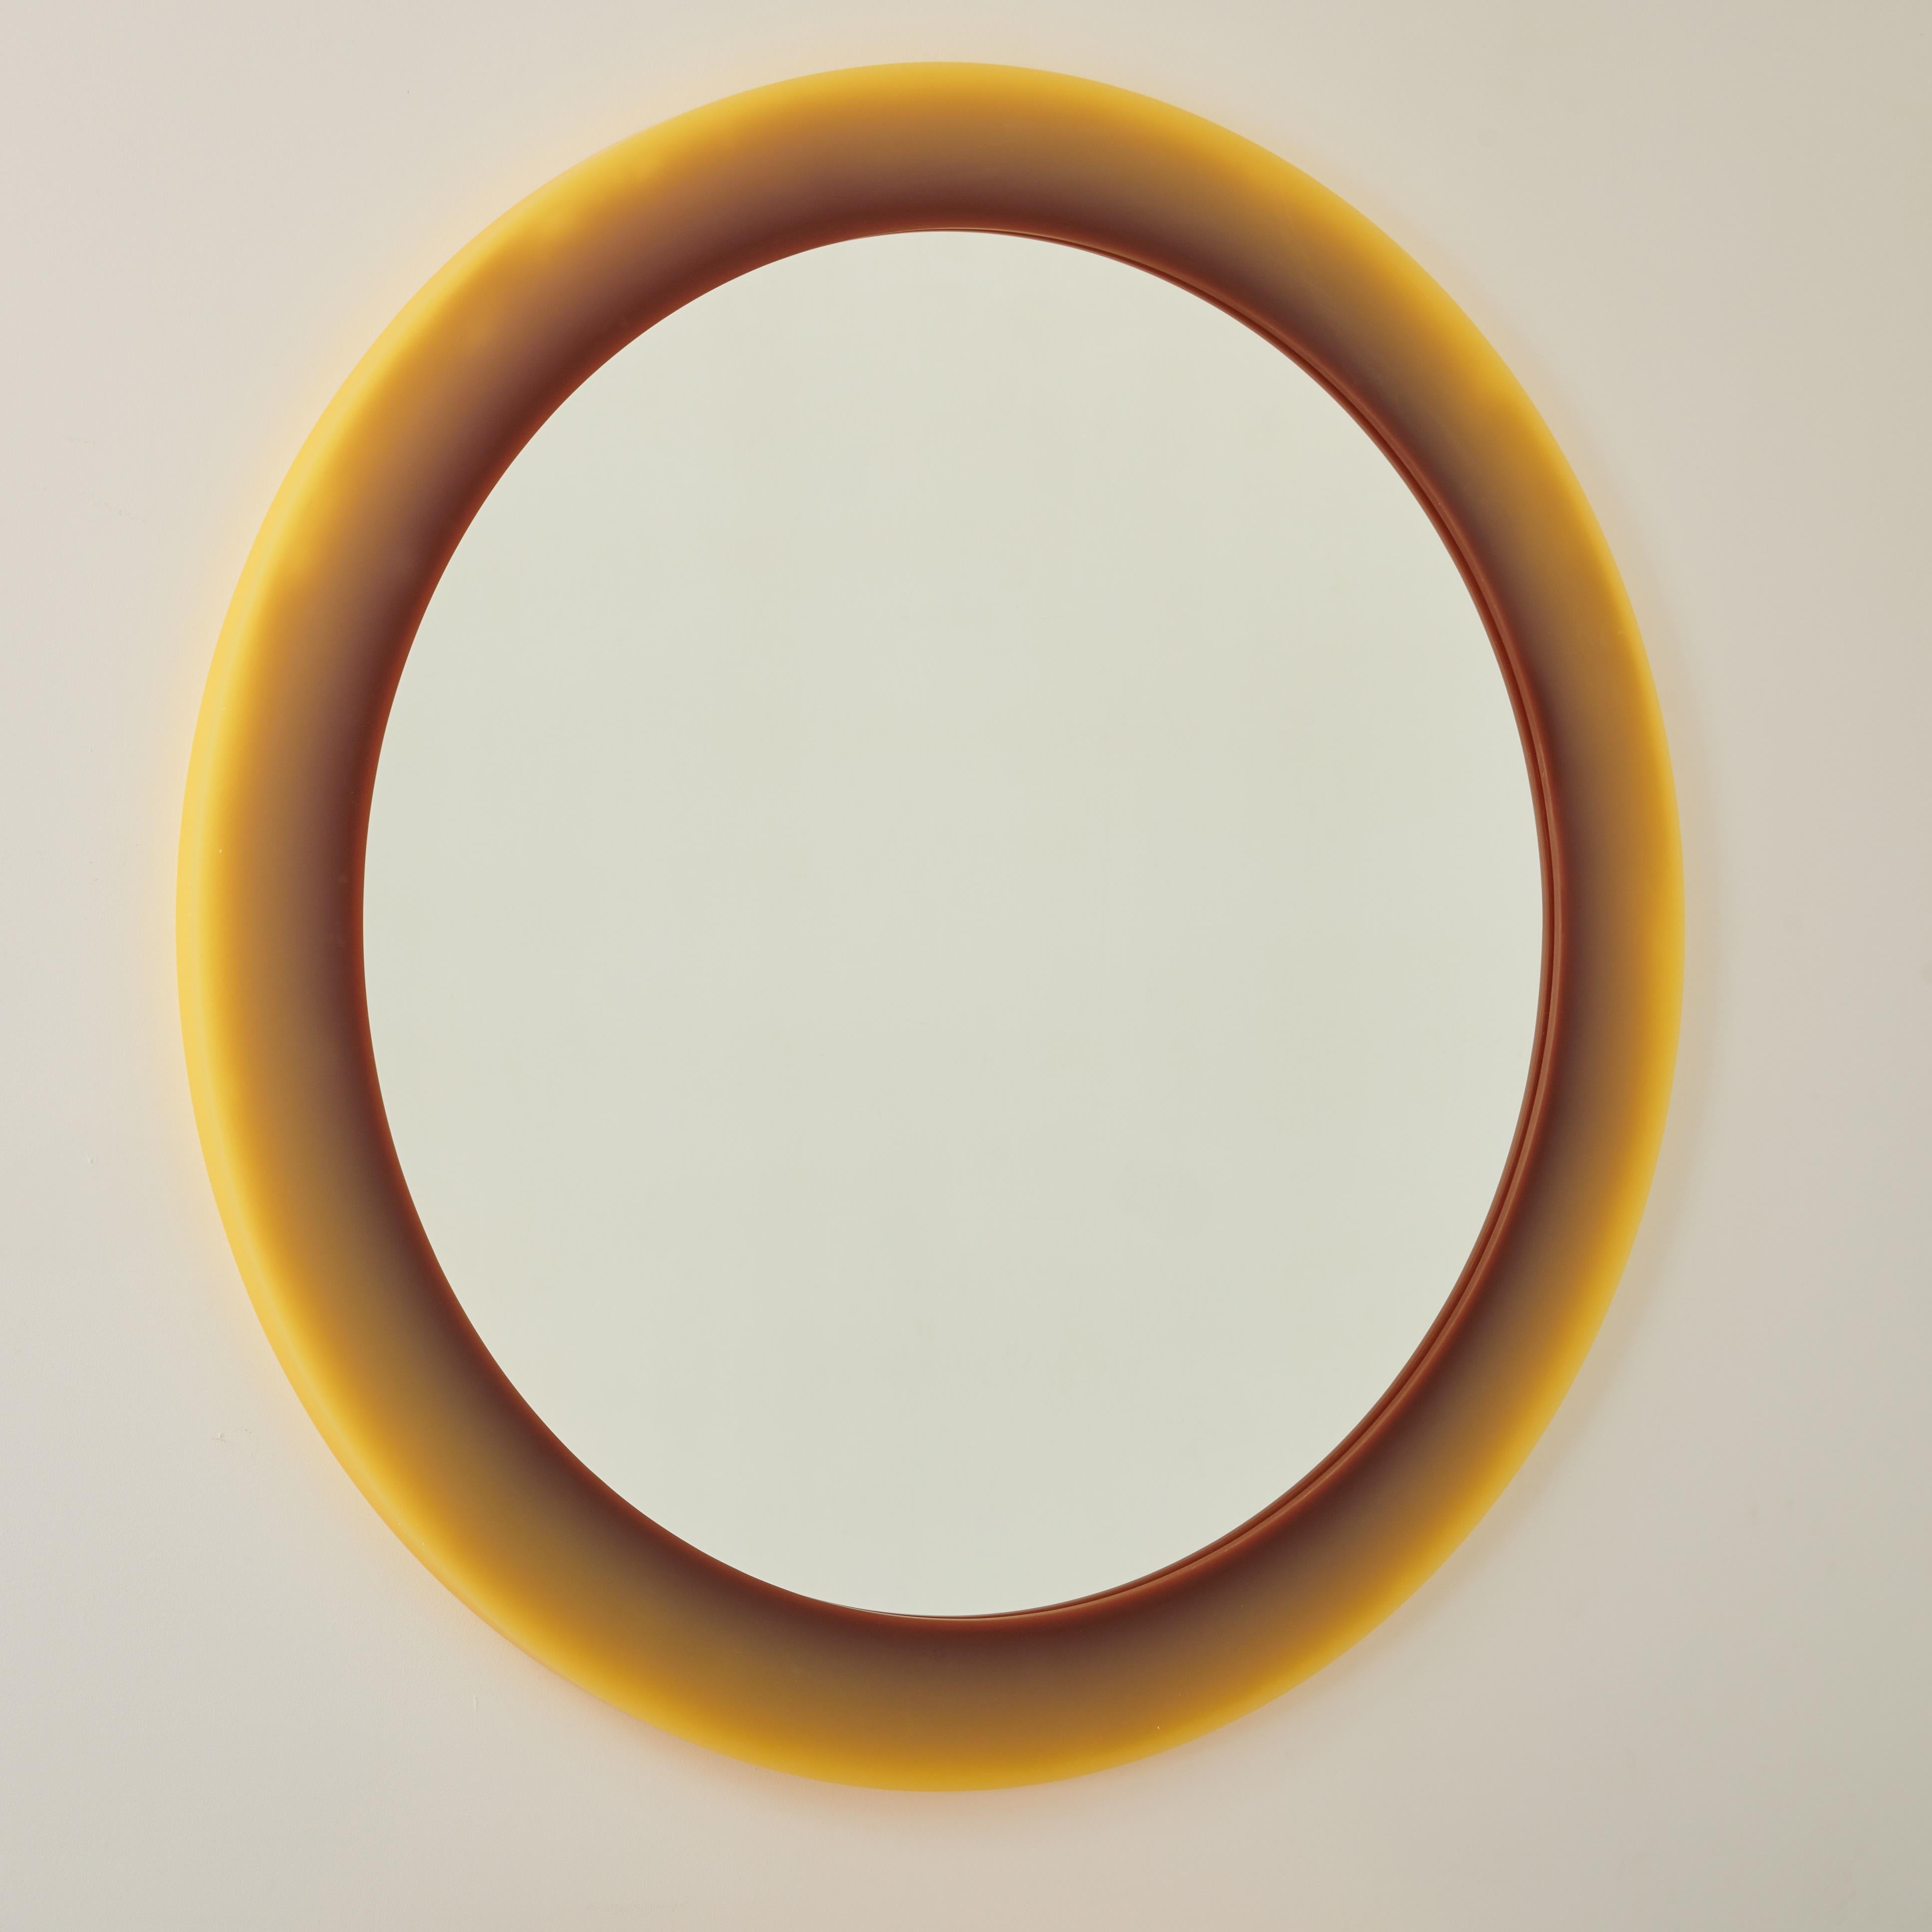 Unique wall mirror with a resin sculpted frame to create a halo of shifting color. The SHIFT technique creates an illusion of a glowing effect, featuring a subtle saturation shift from taupe to golden wheat by manipulating the visual interaction